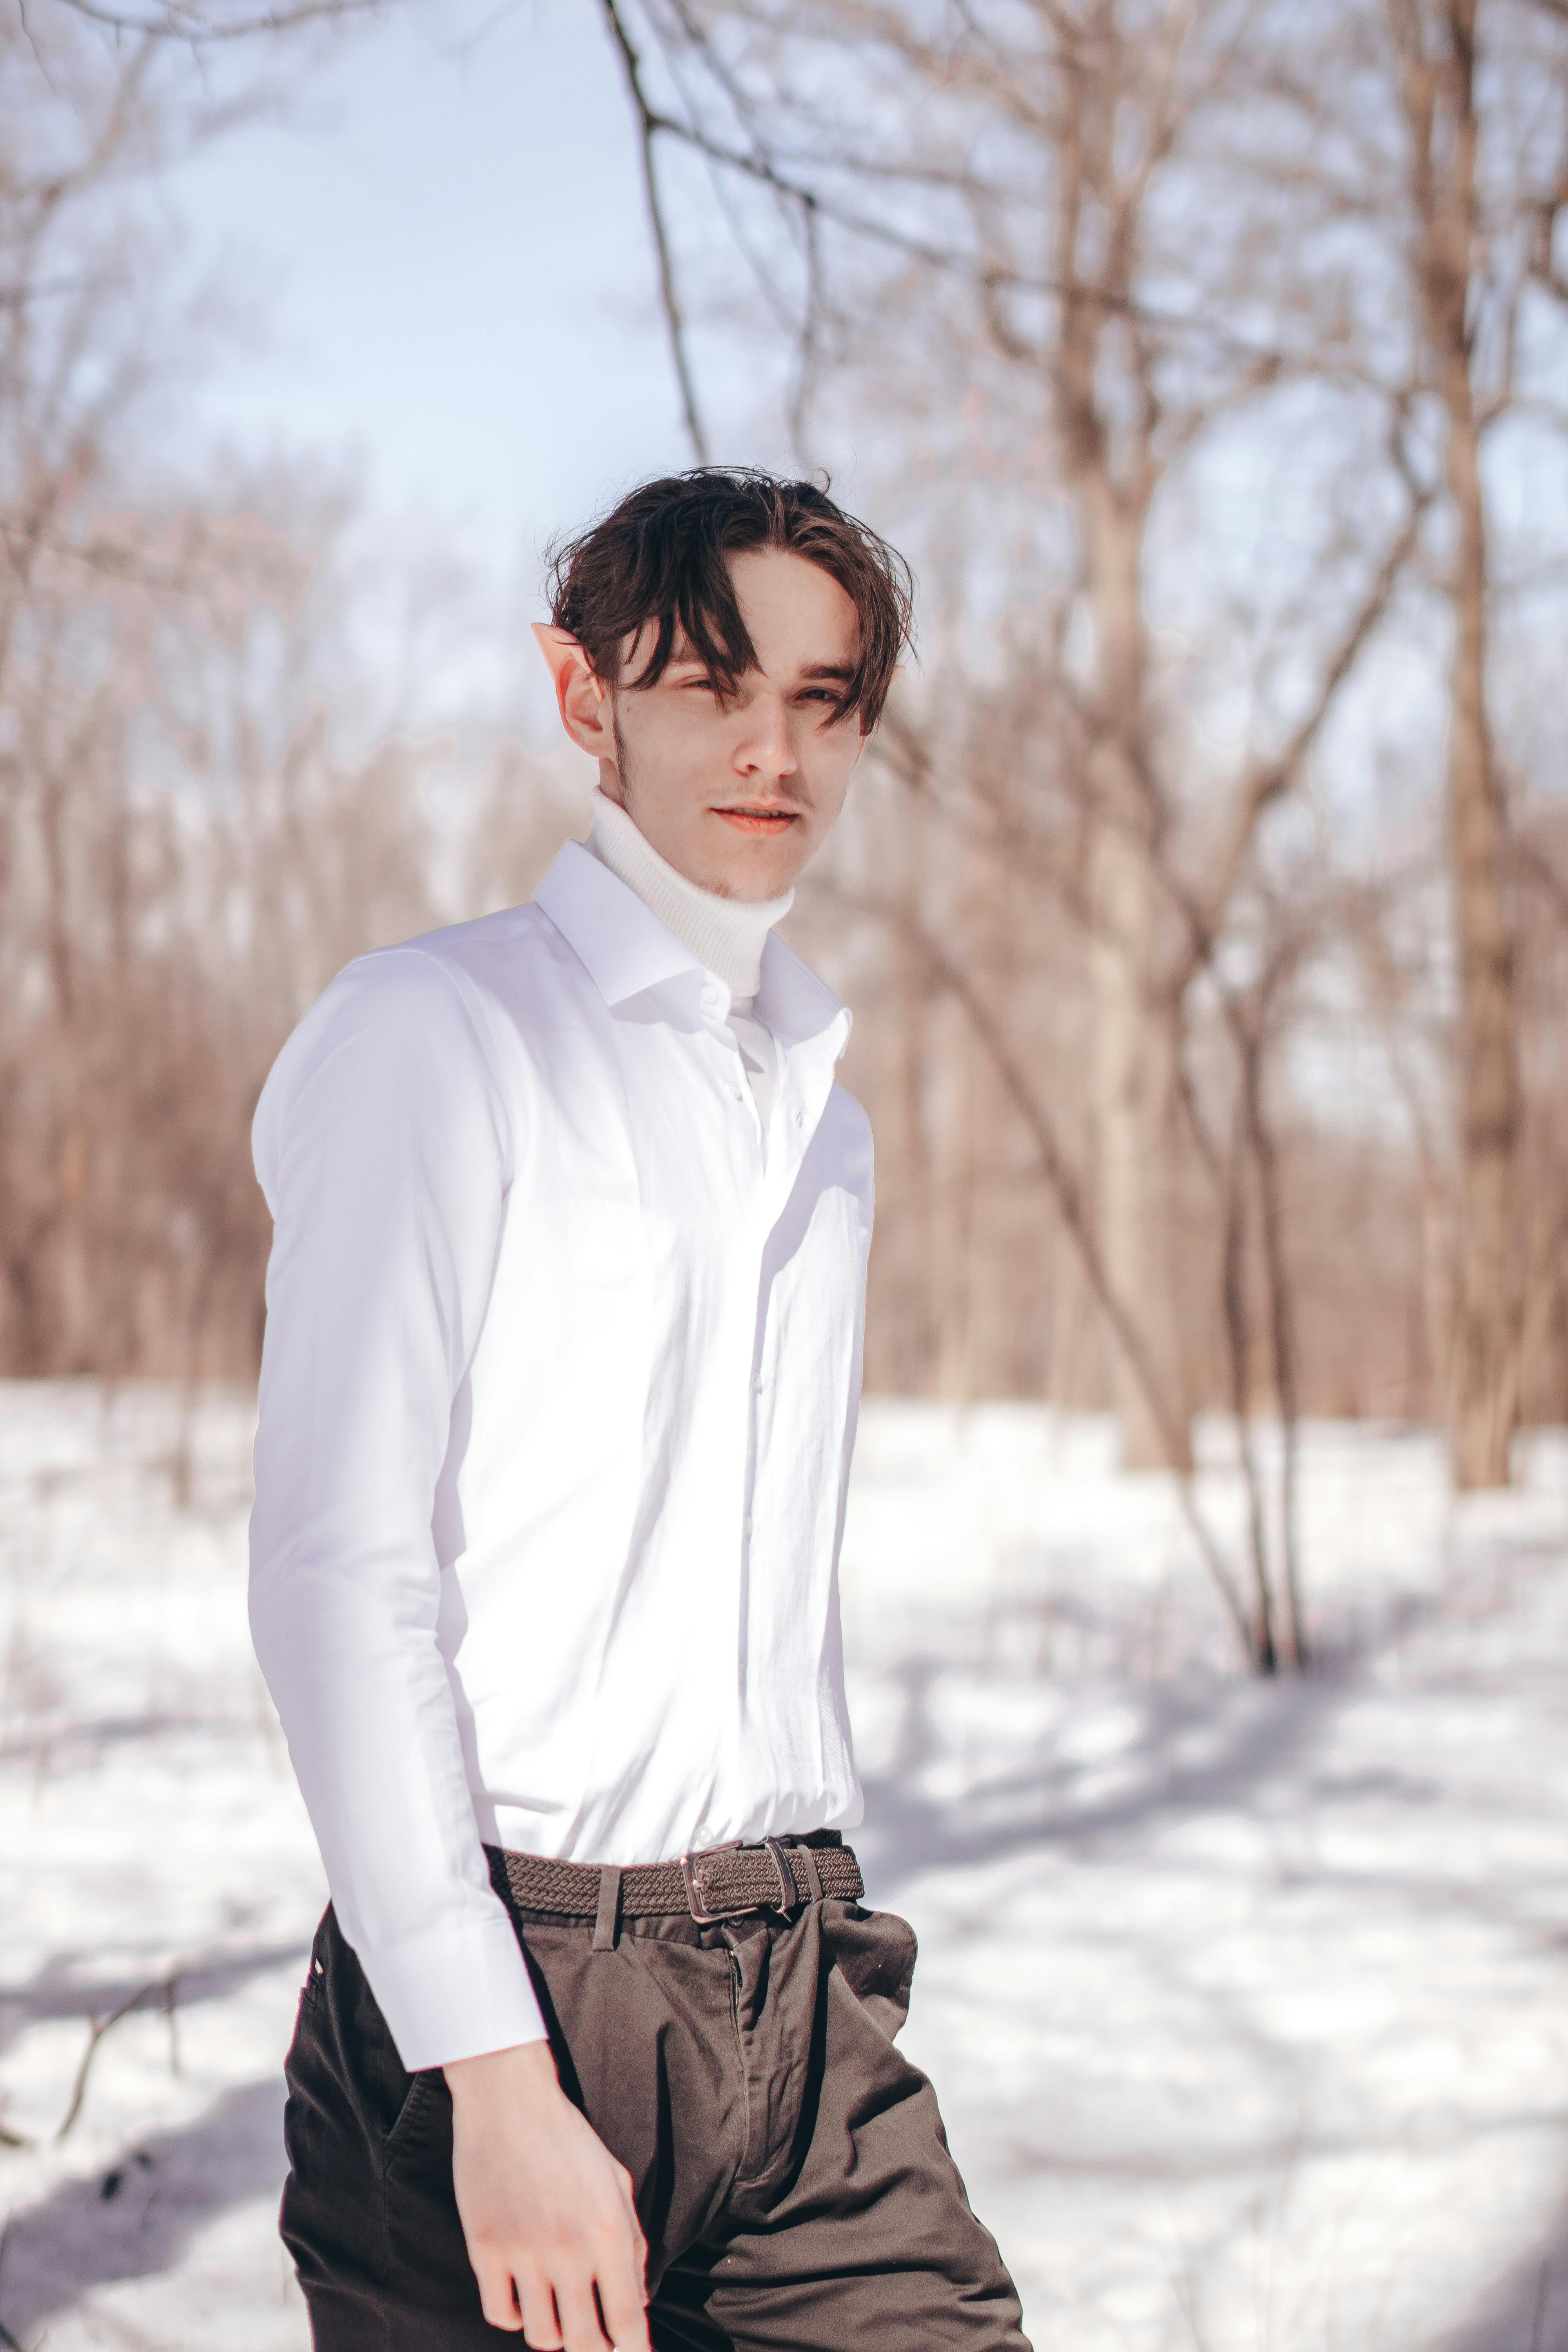 Handsome Smiling Young Man Posing Winter Stock Photo 169809332 |  Shutterstock